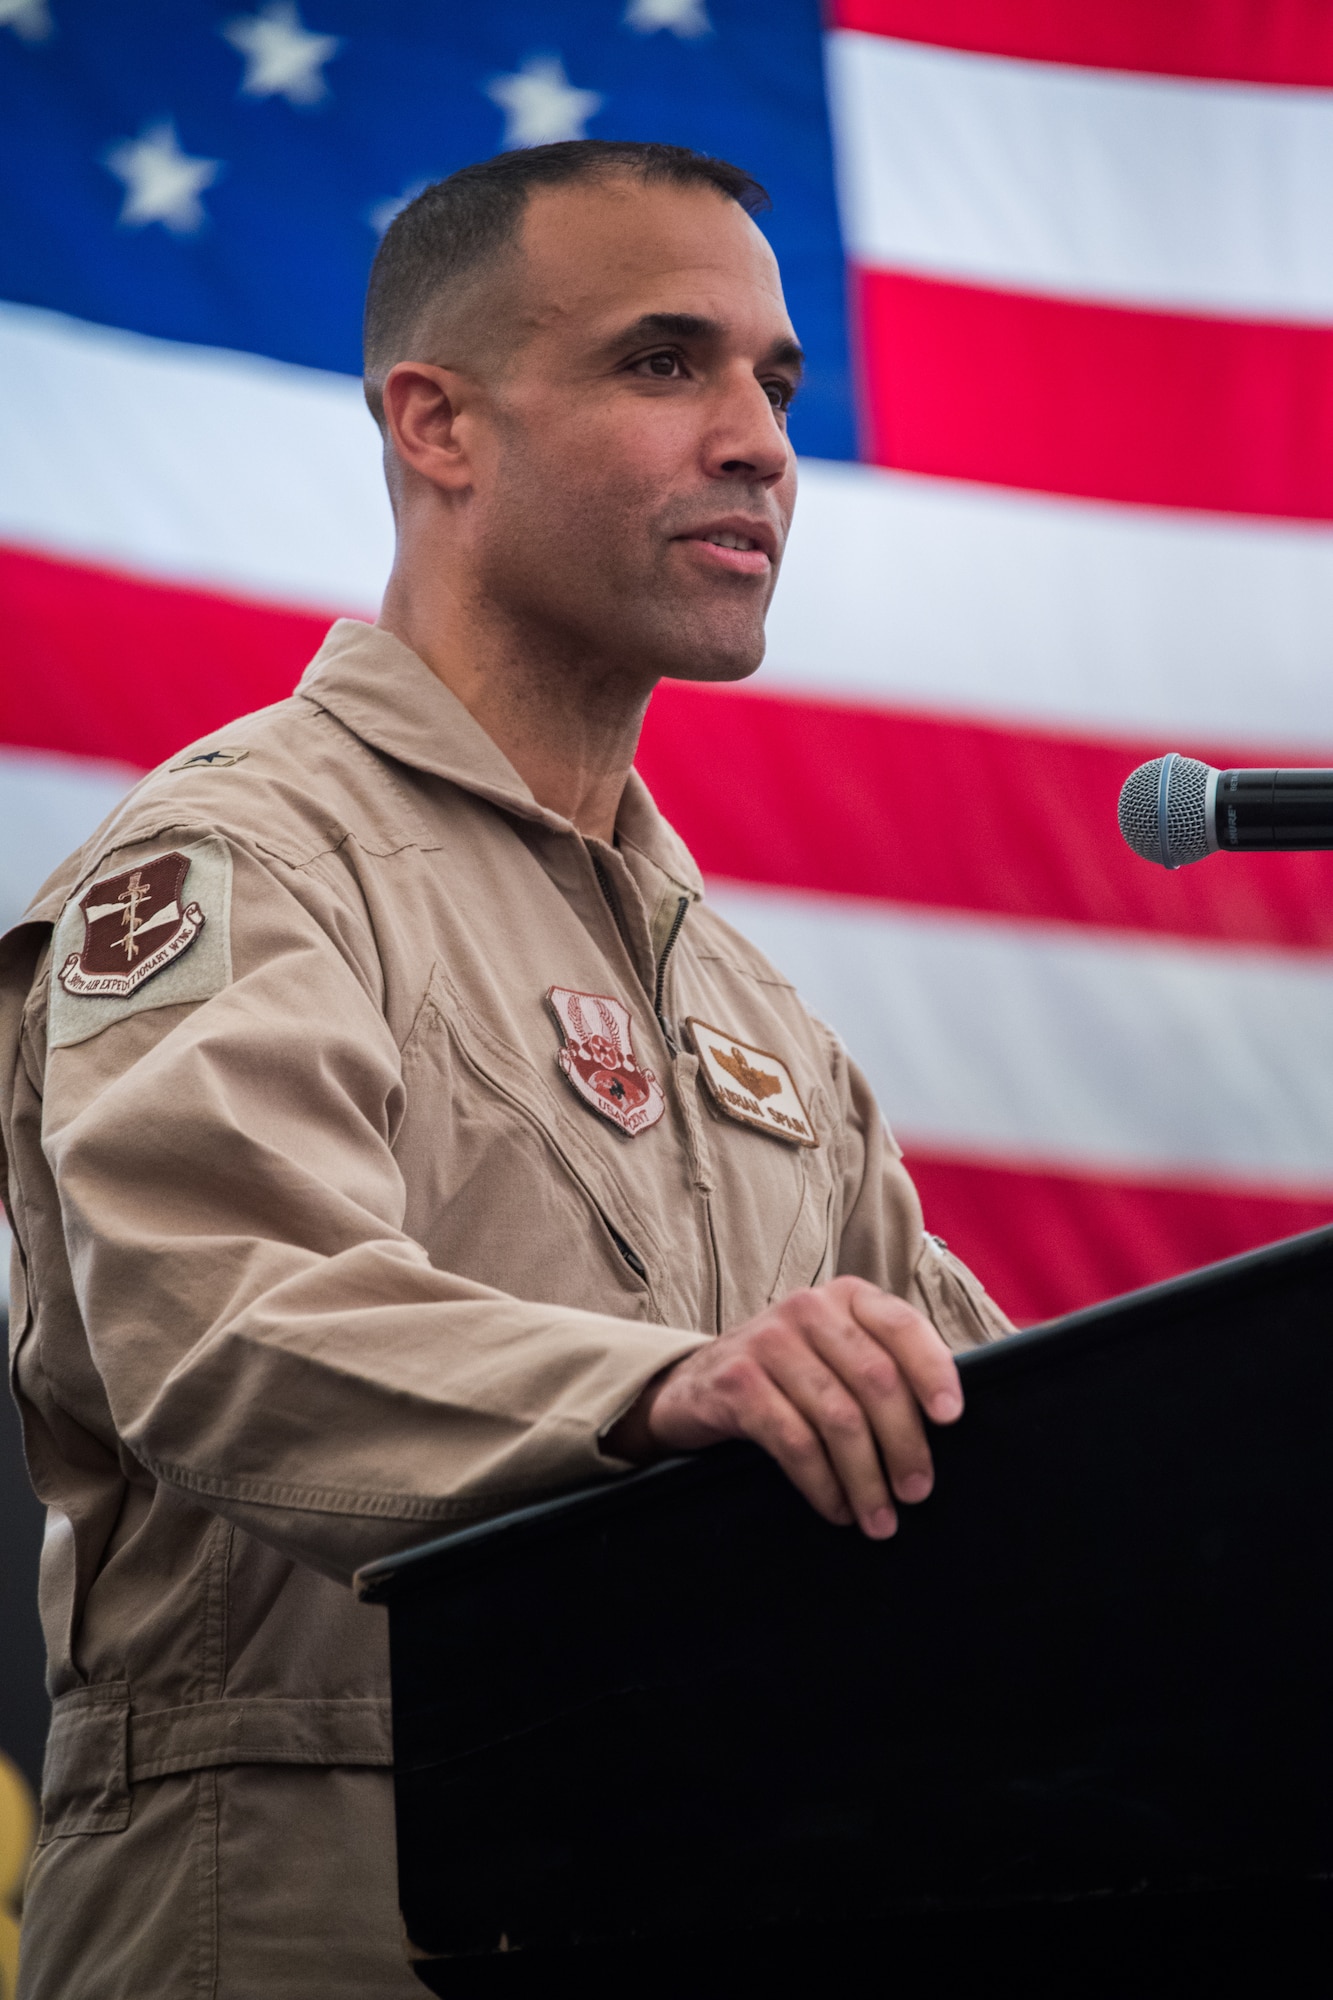 U.S. Air Force Brig. Gen. Adrian L. Spain, commander of the 380th Air Expeditionary Wing, speaks to a crowd gathered in attendance for a change of command ceremony at Al Dhafra Air Base, July 2, 2018. (U.S. Air Force photo by Tech. Sgt. Nieko Carzis)